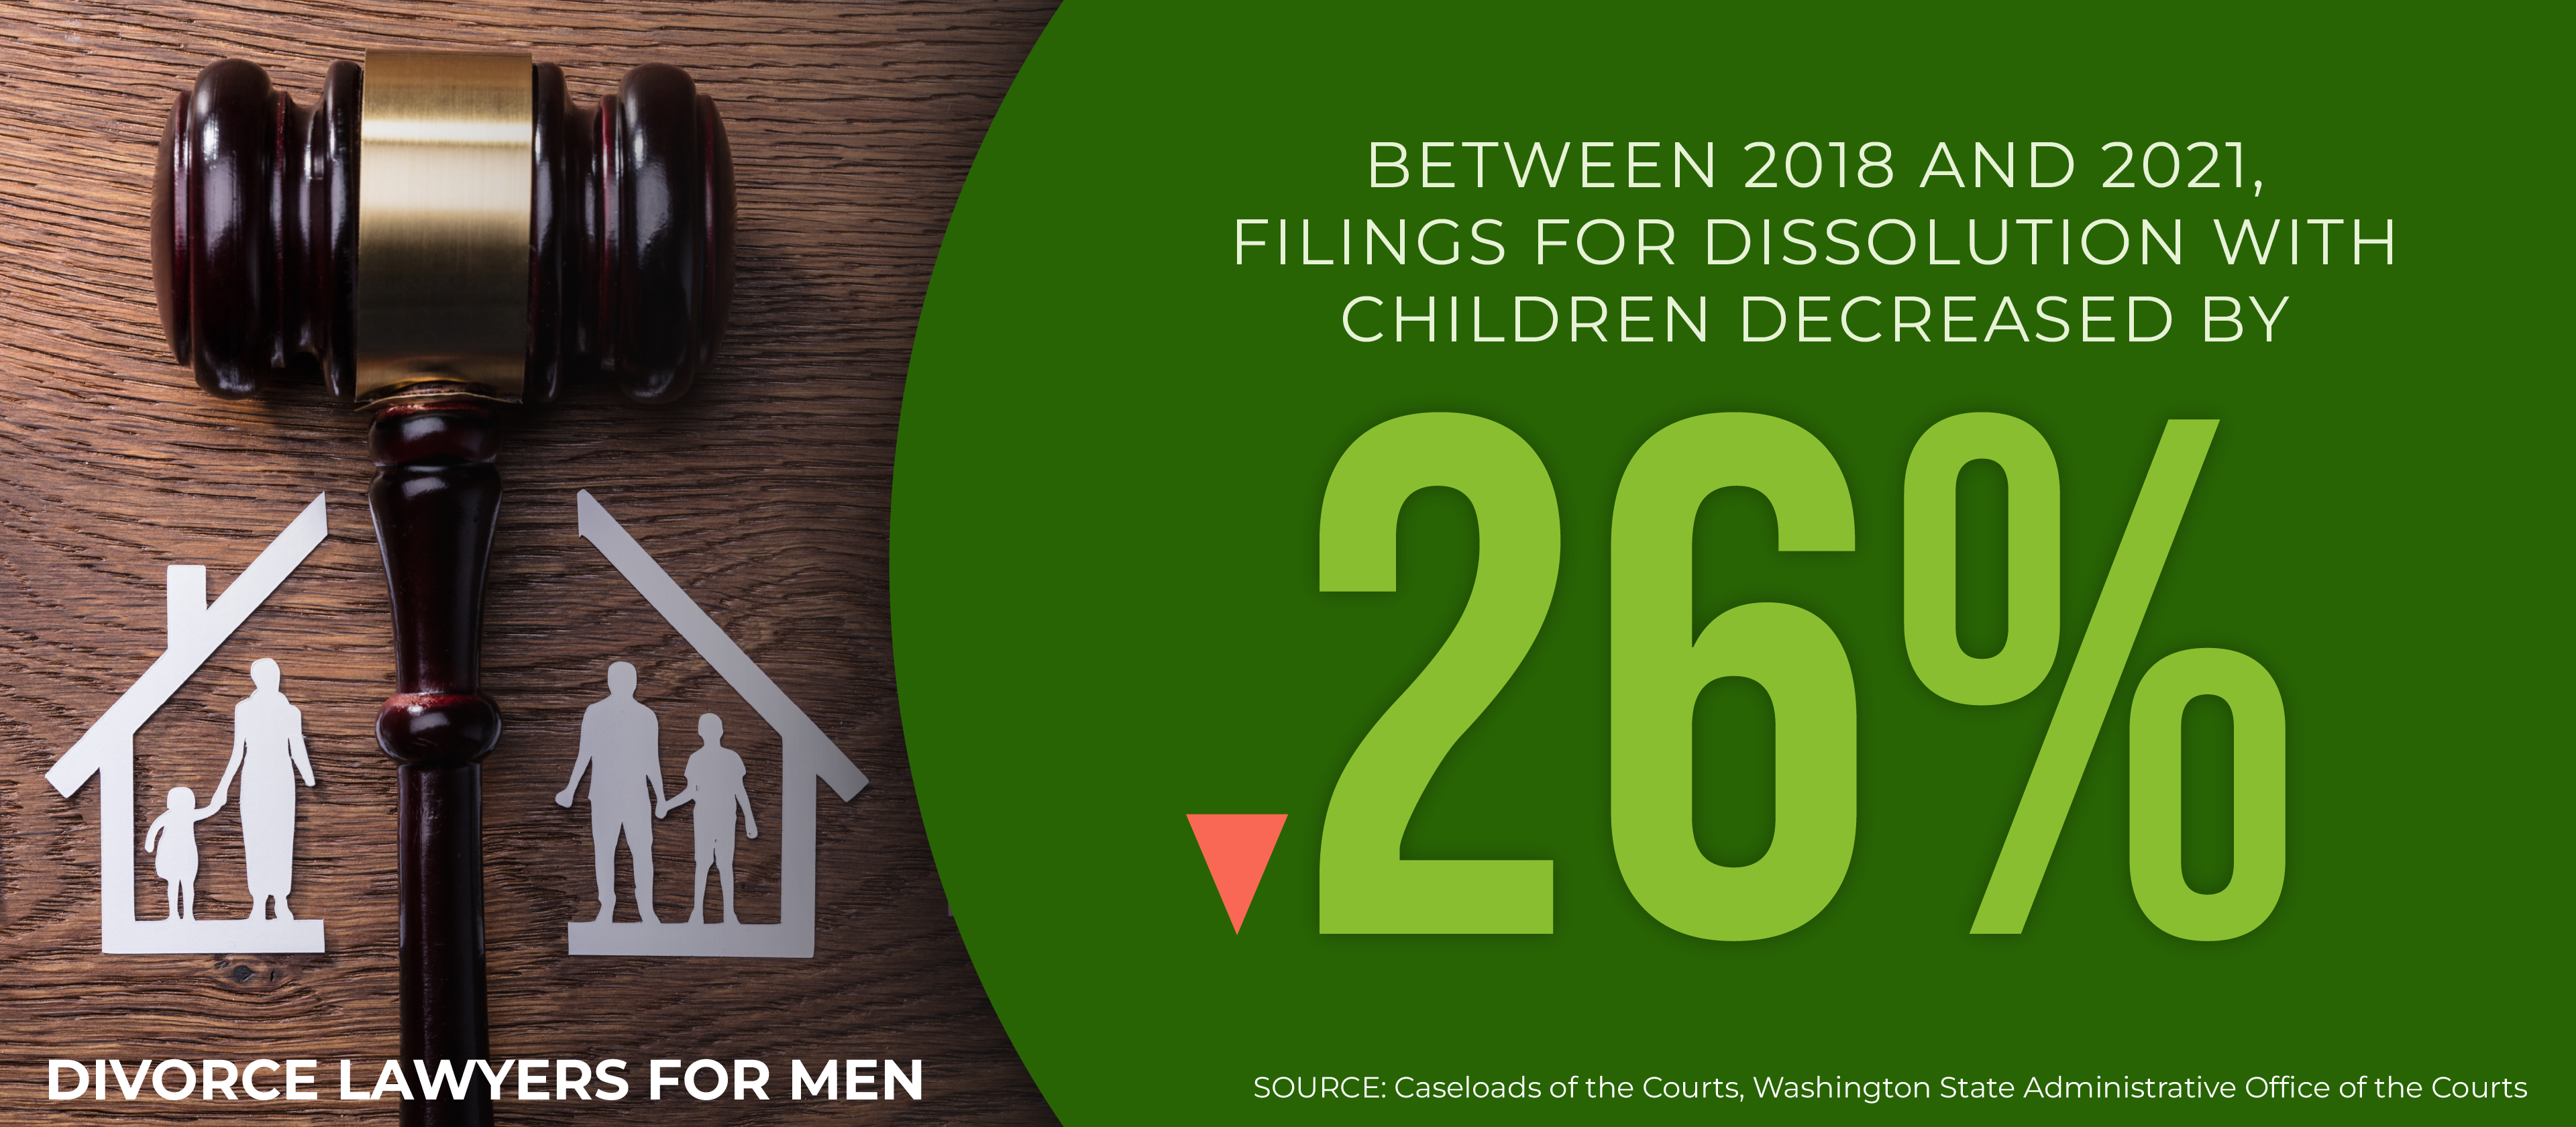 Between 2018 and 2021, filings for dissolution with children decreased by 26%.